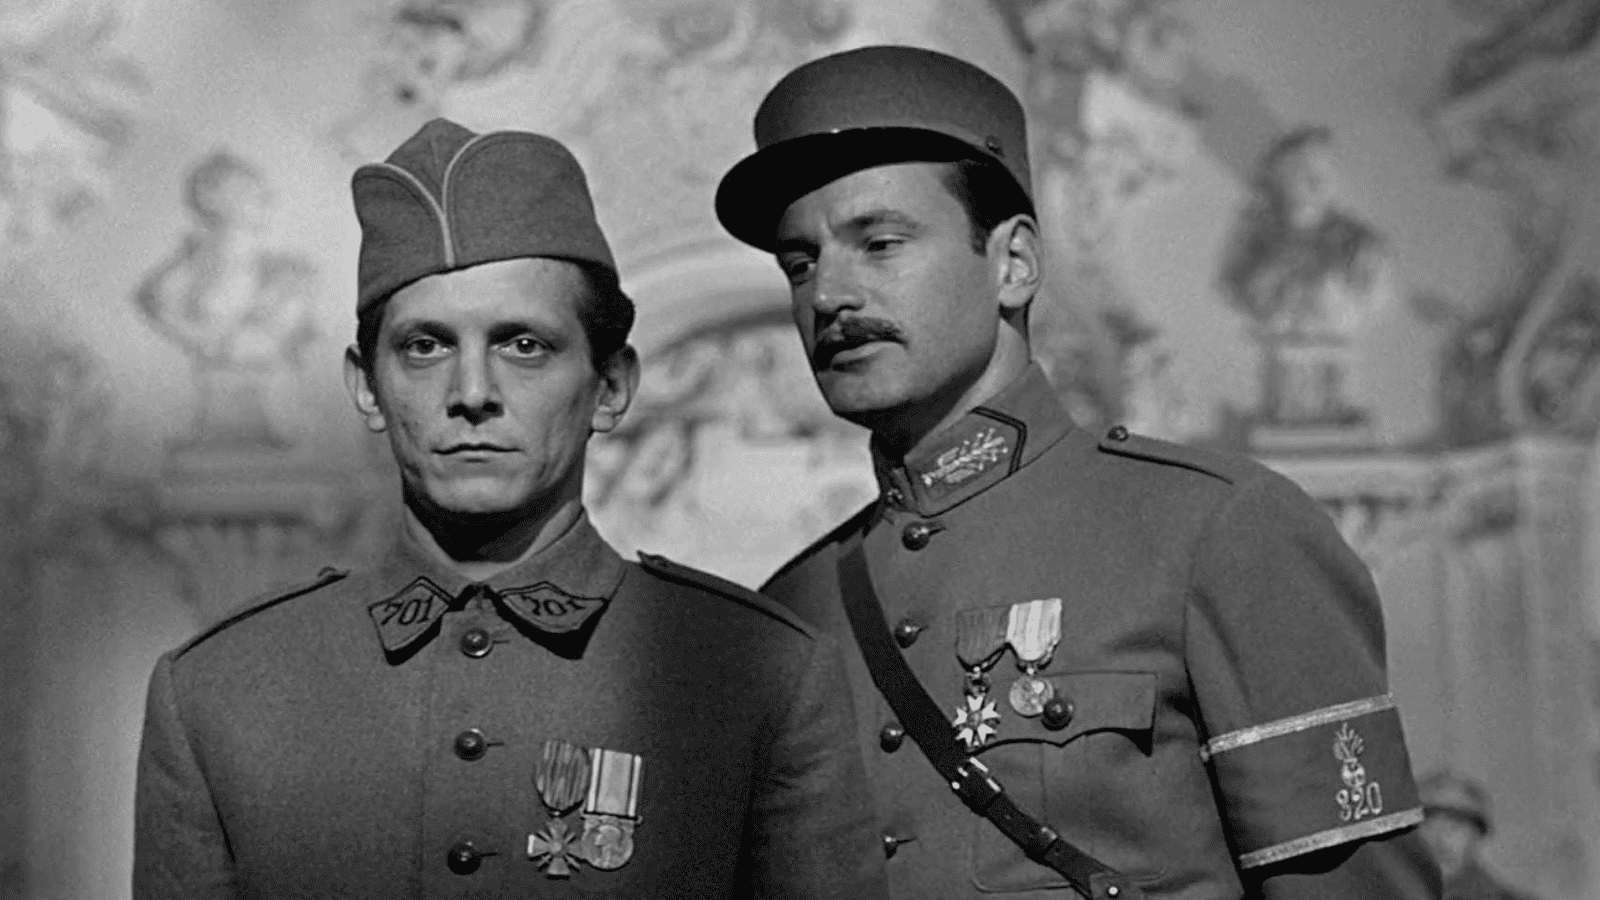 Scene from Paths of Glory